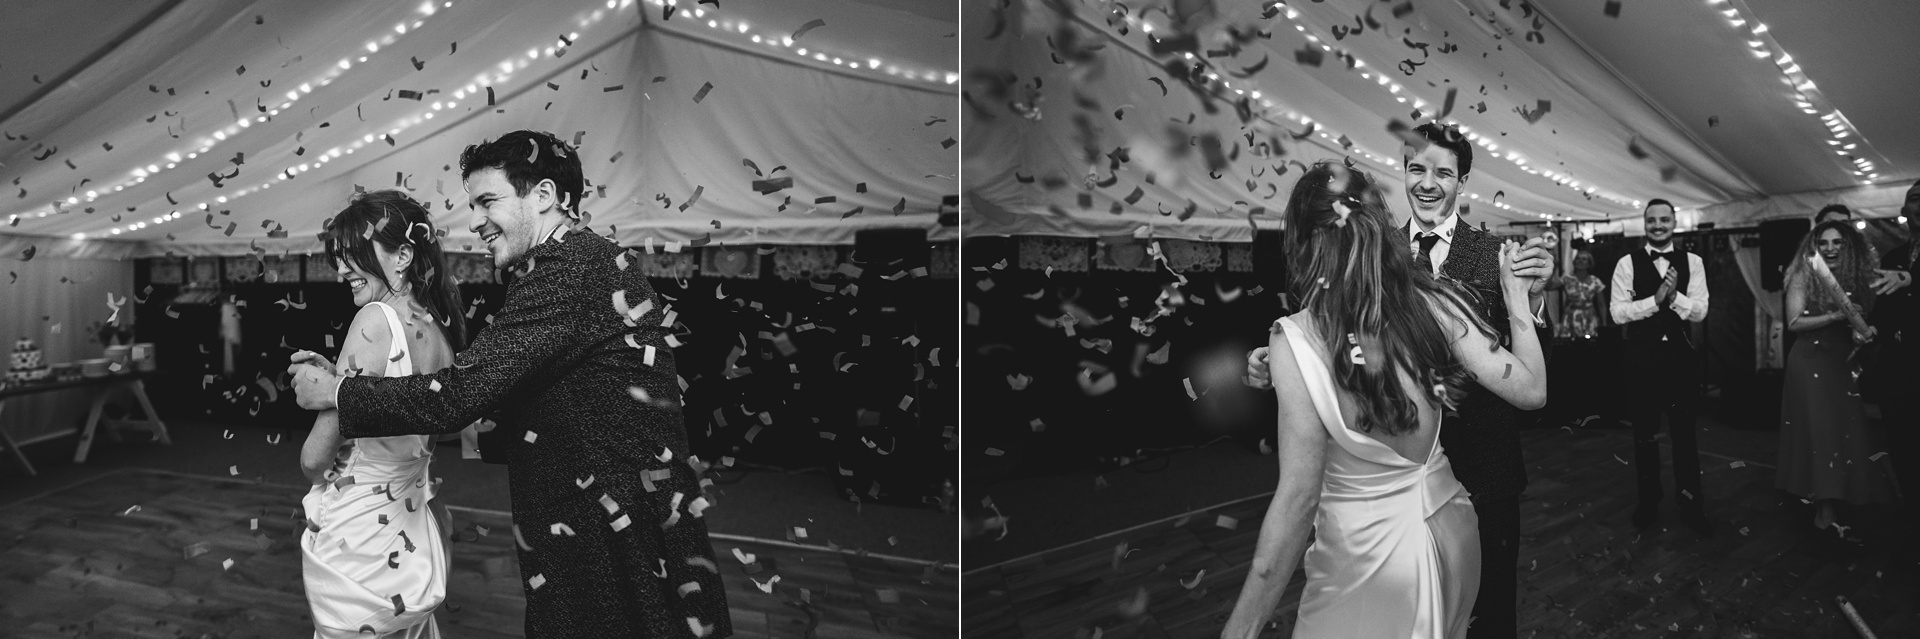 A stylish bride and groom having their first dance in a marquee